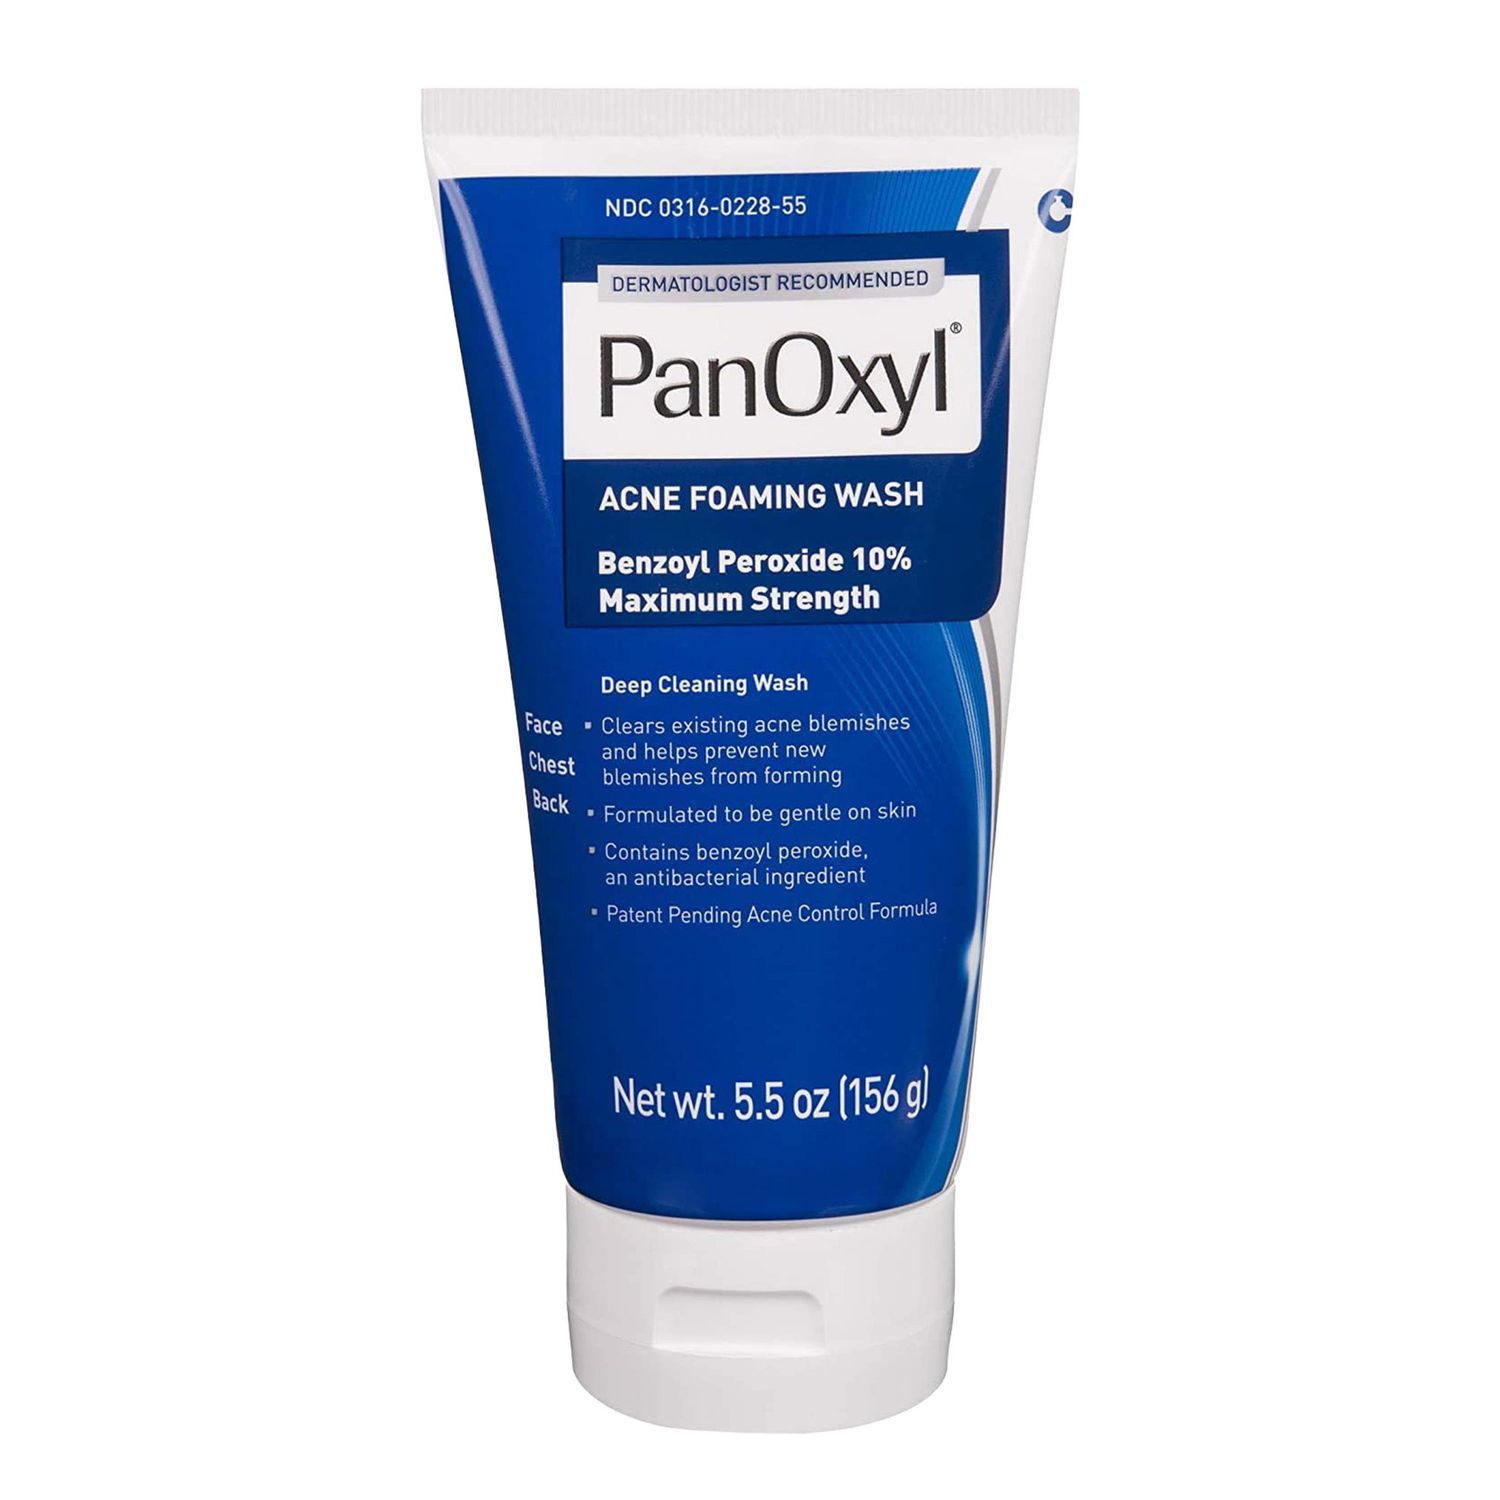 PanOxyl-The-Best-Body-Acne-Treatments-Products